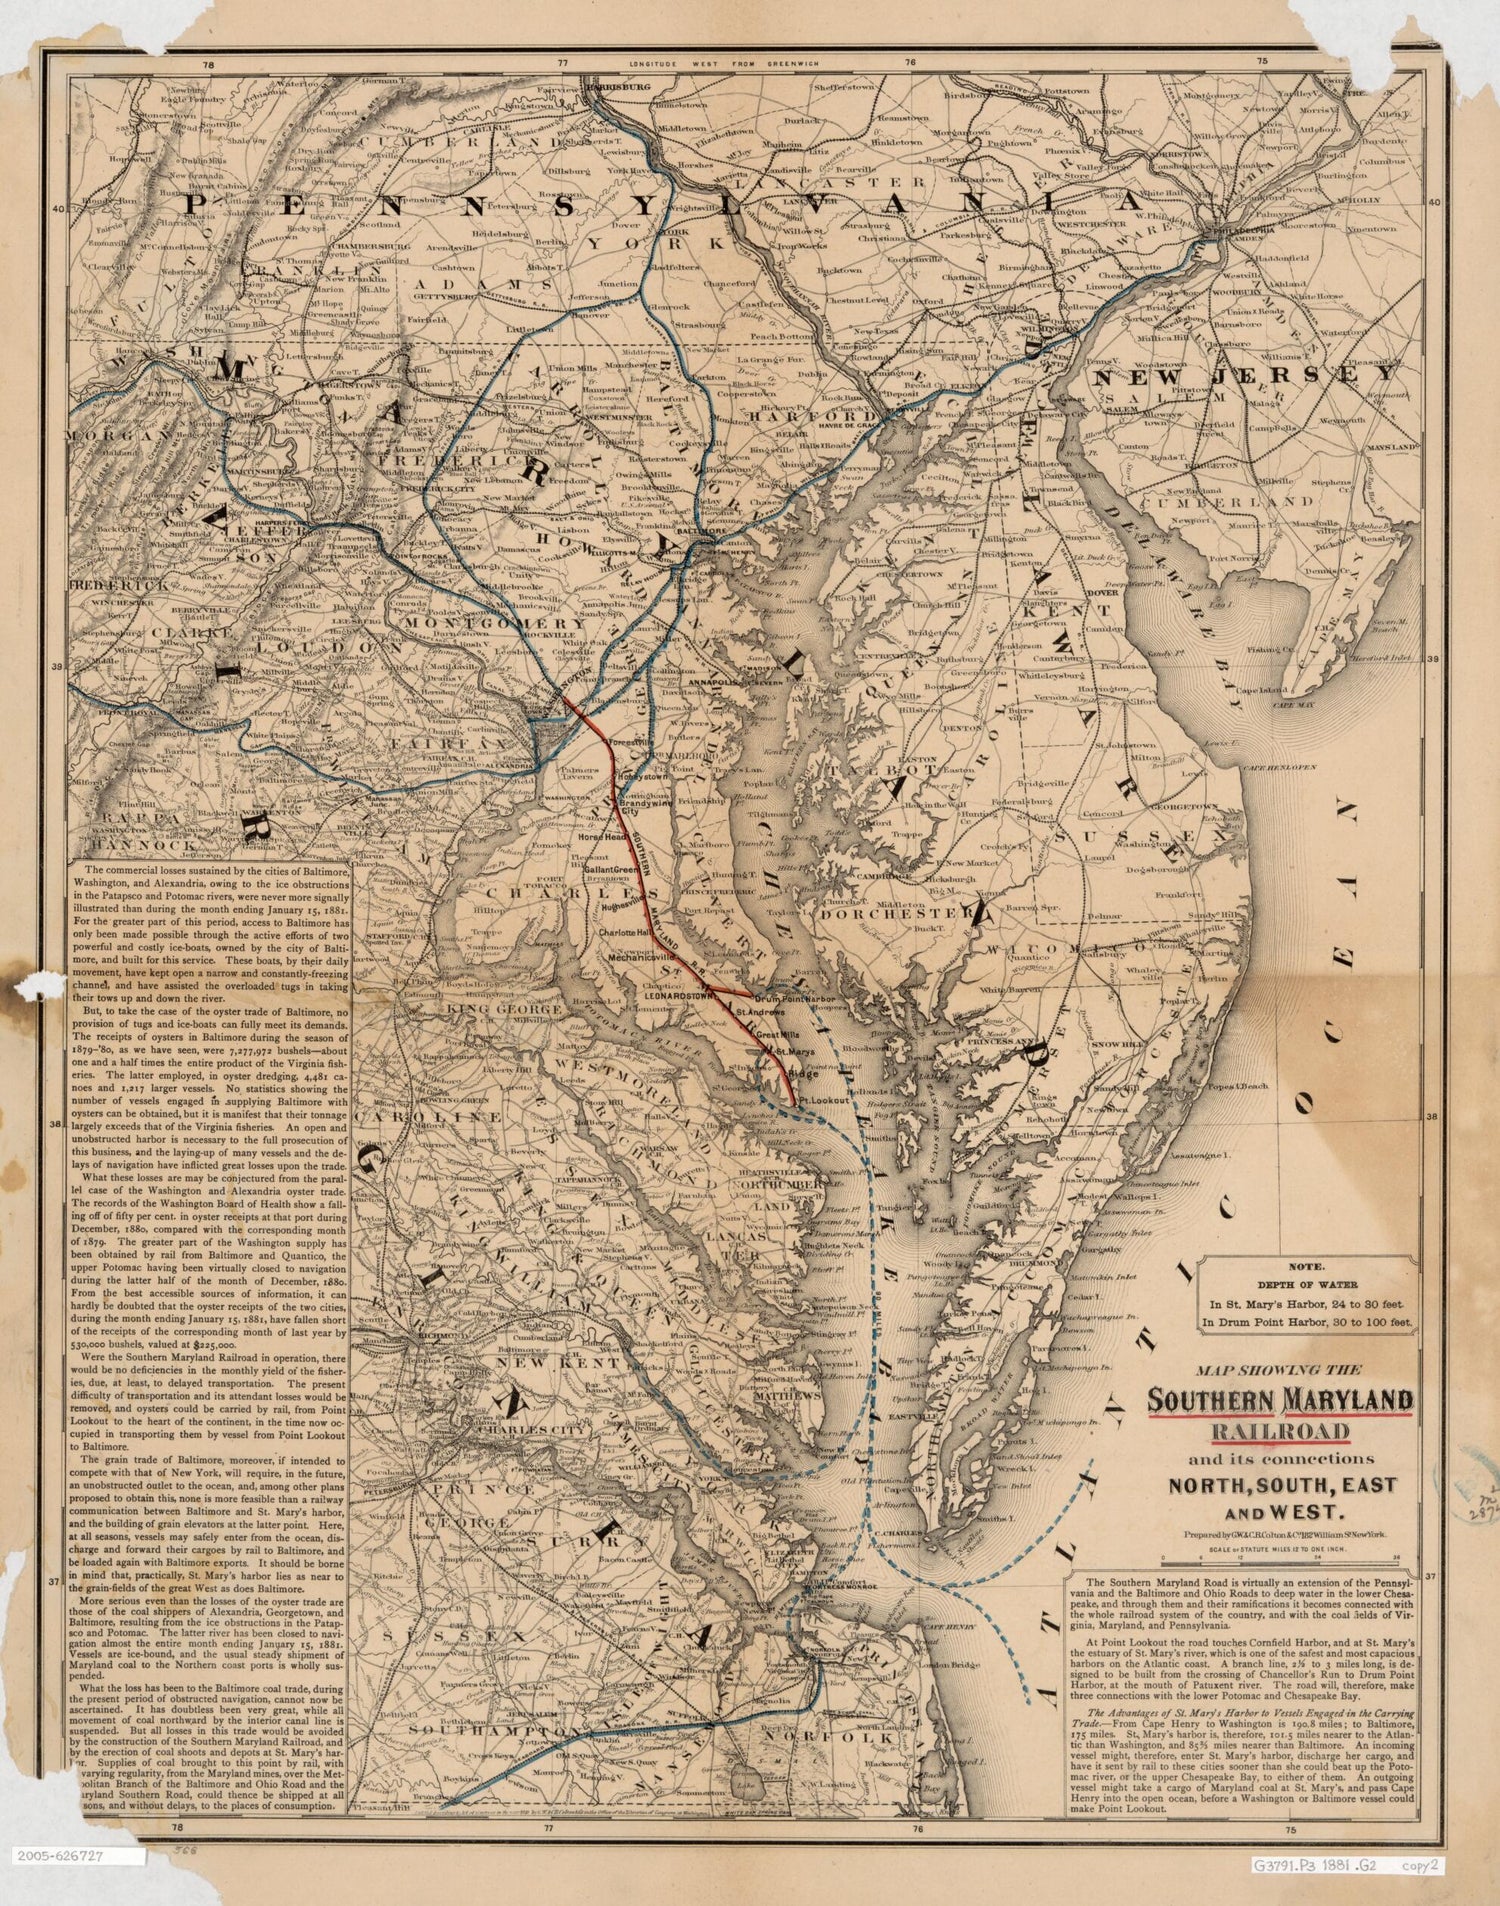 This old map of Map Showing the Southern Maryland Railroad and Its Connections : North, South, East, and West from 1881 was created by  G.W. &amp; C.B. Colton &amp; Co,  Southern Maryland Railroad in 1881